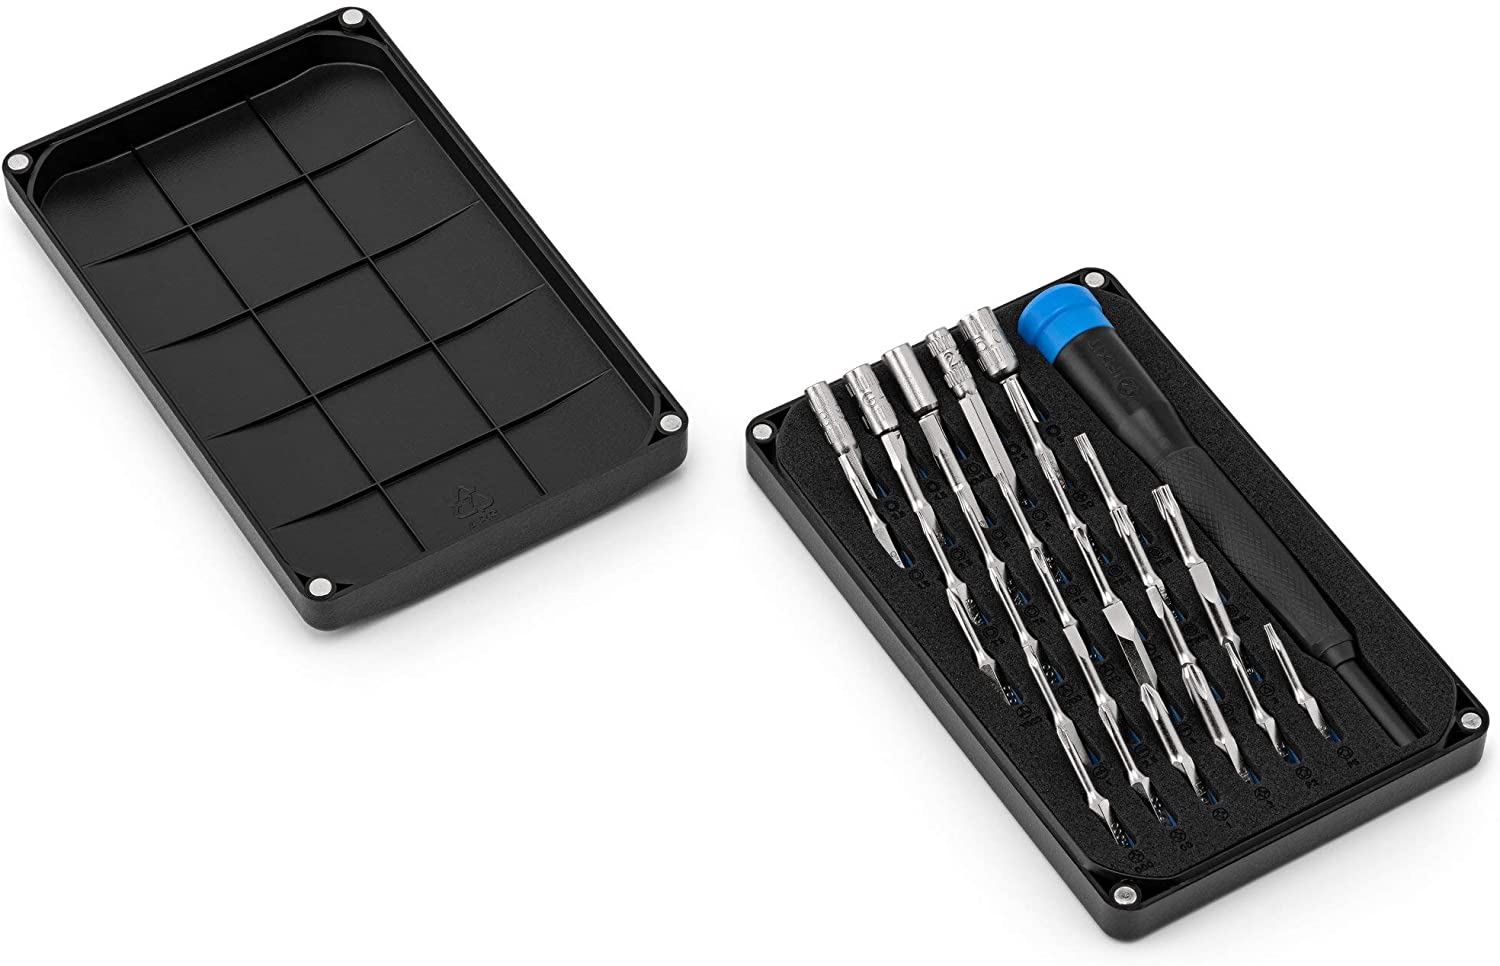 iFixit Tool Kit for Electronics, Mobile Phone Repairing